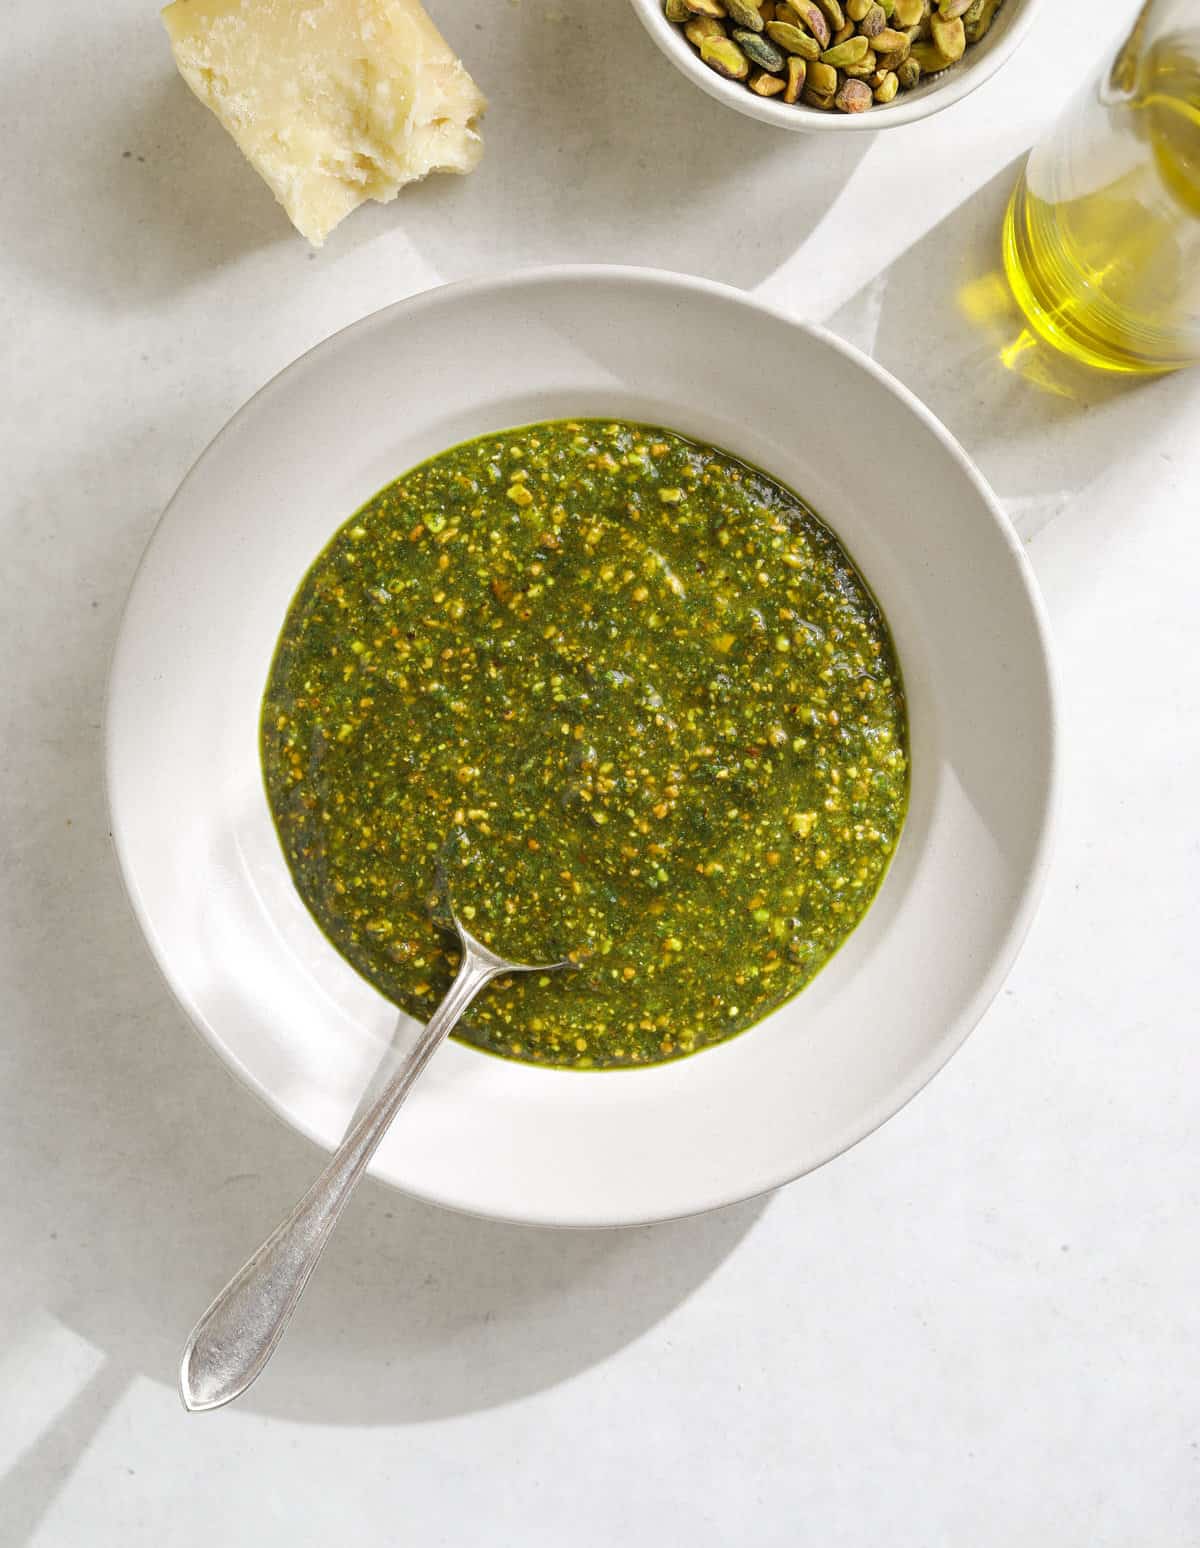 A bowl of green pesto with a silver spoon, surrounded by a bottle of olive oil, a small bowl of pistachios and a hunk of parmesan cheese.